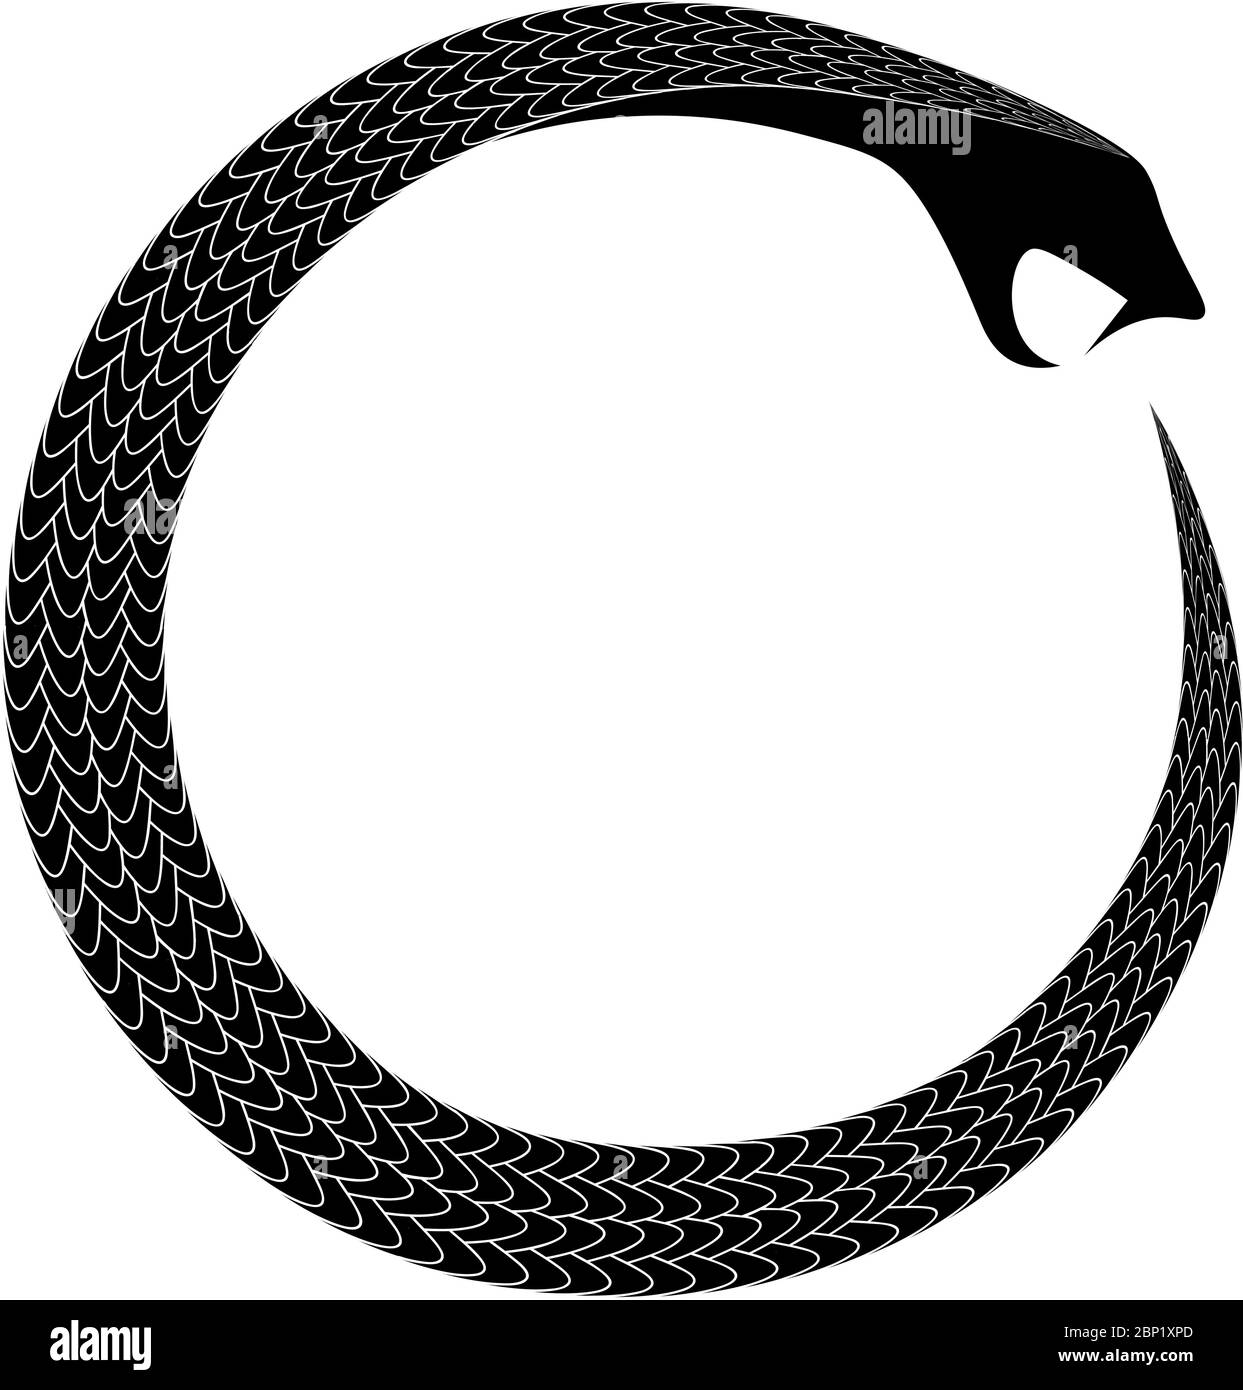 ancient occult and alchemical symbol coiled snake eating tail ouroboros Stock Vector